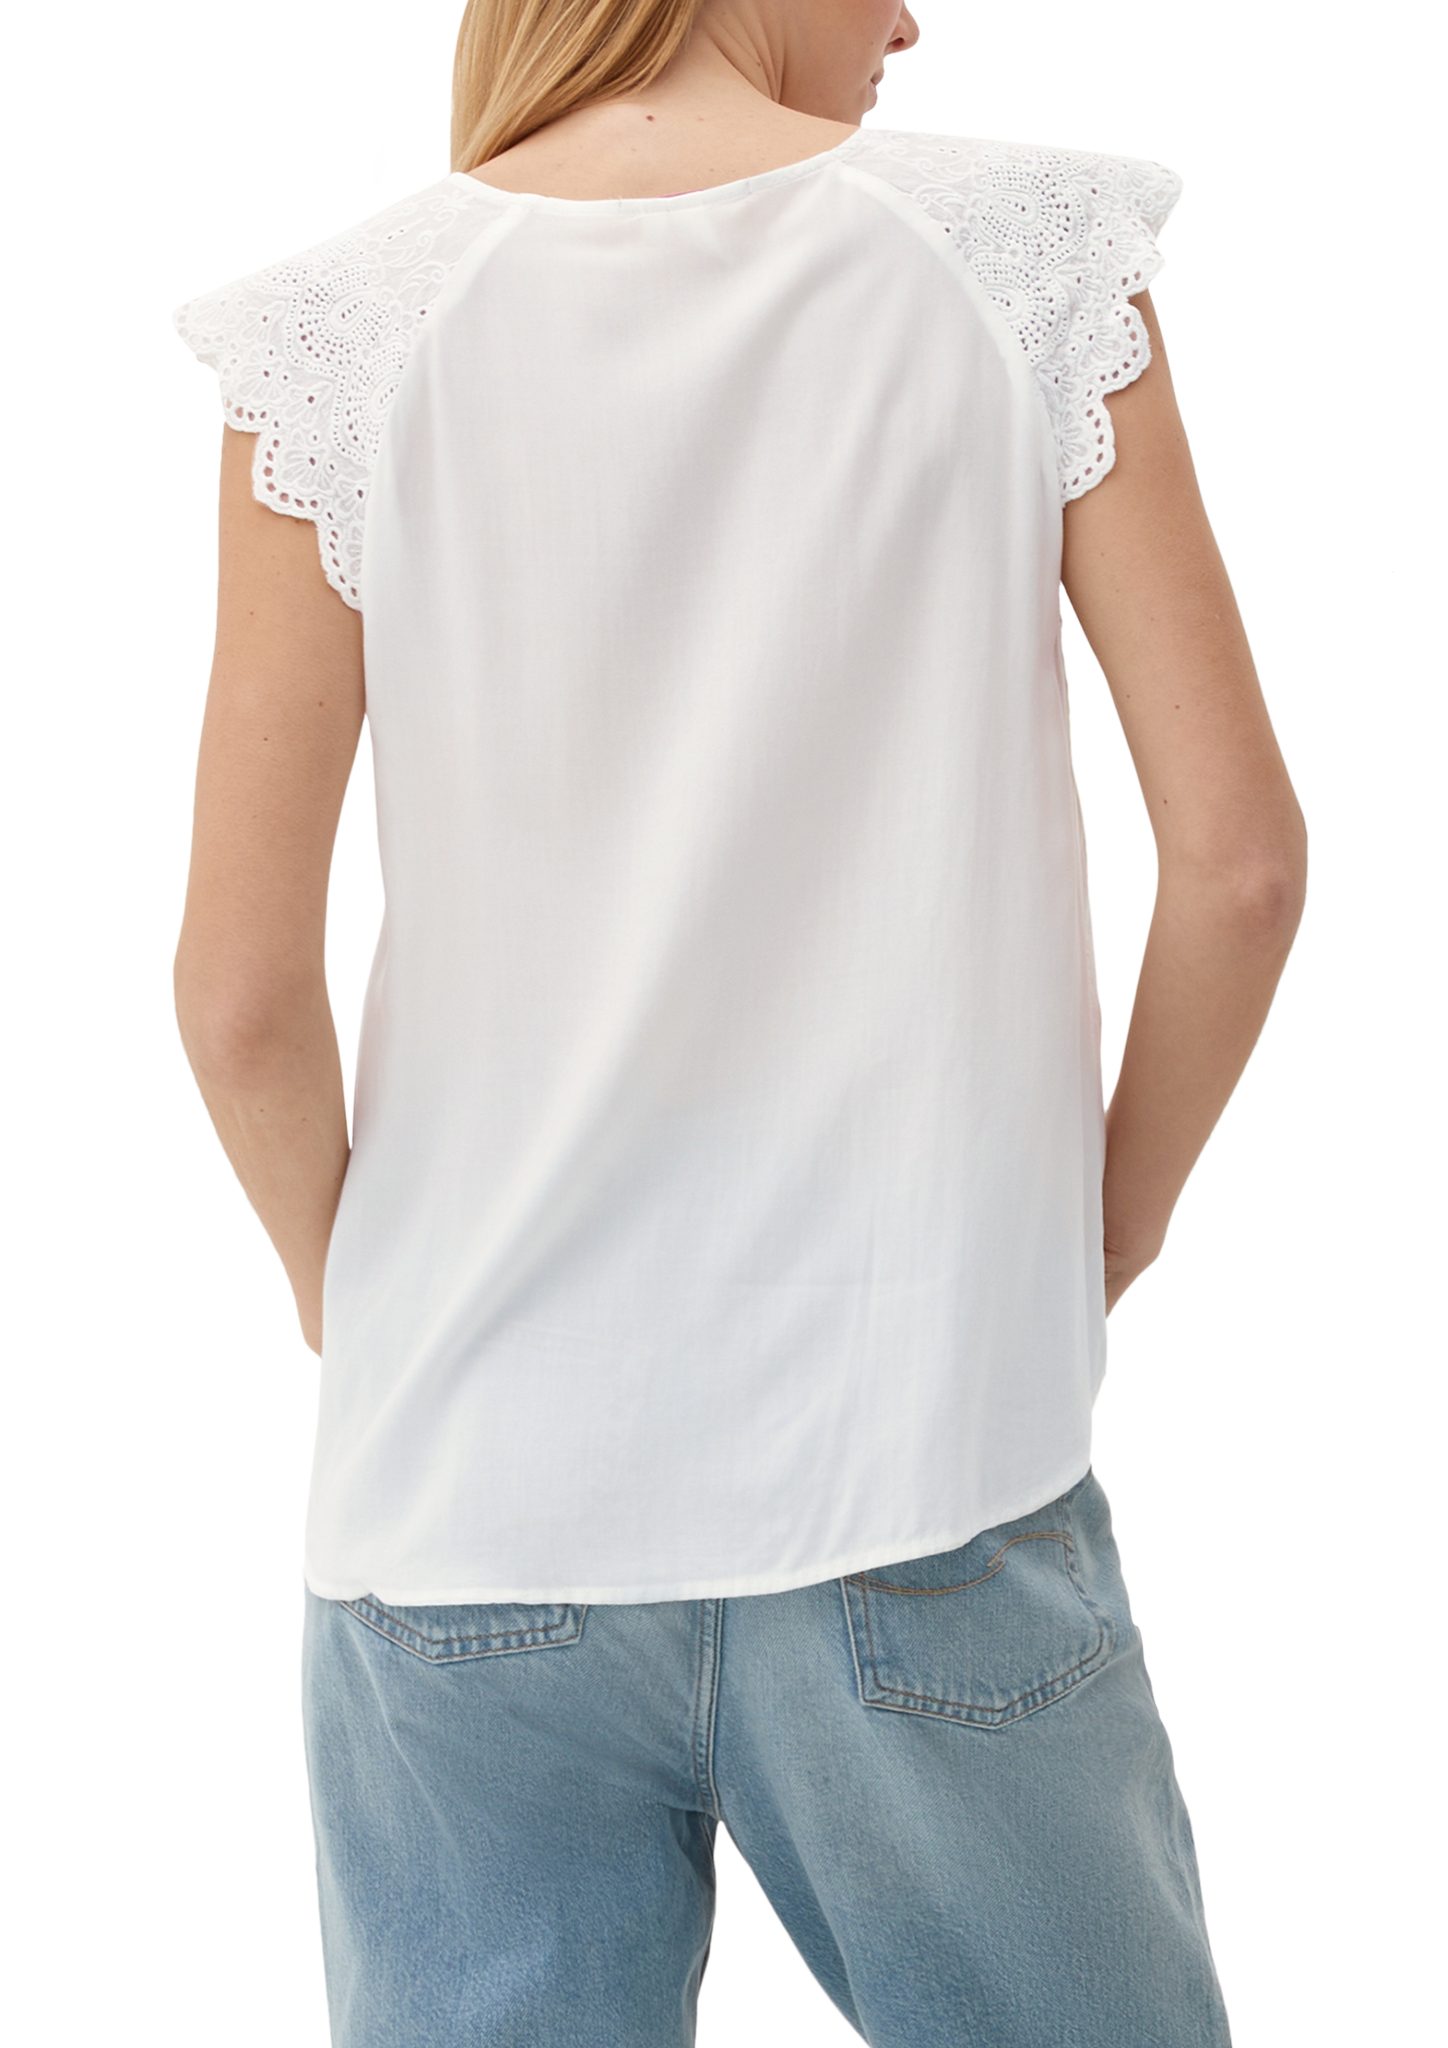 QS Blusentop Broderie ecru Bluse Anglaise mit